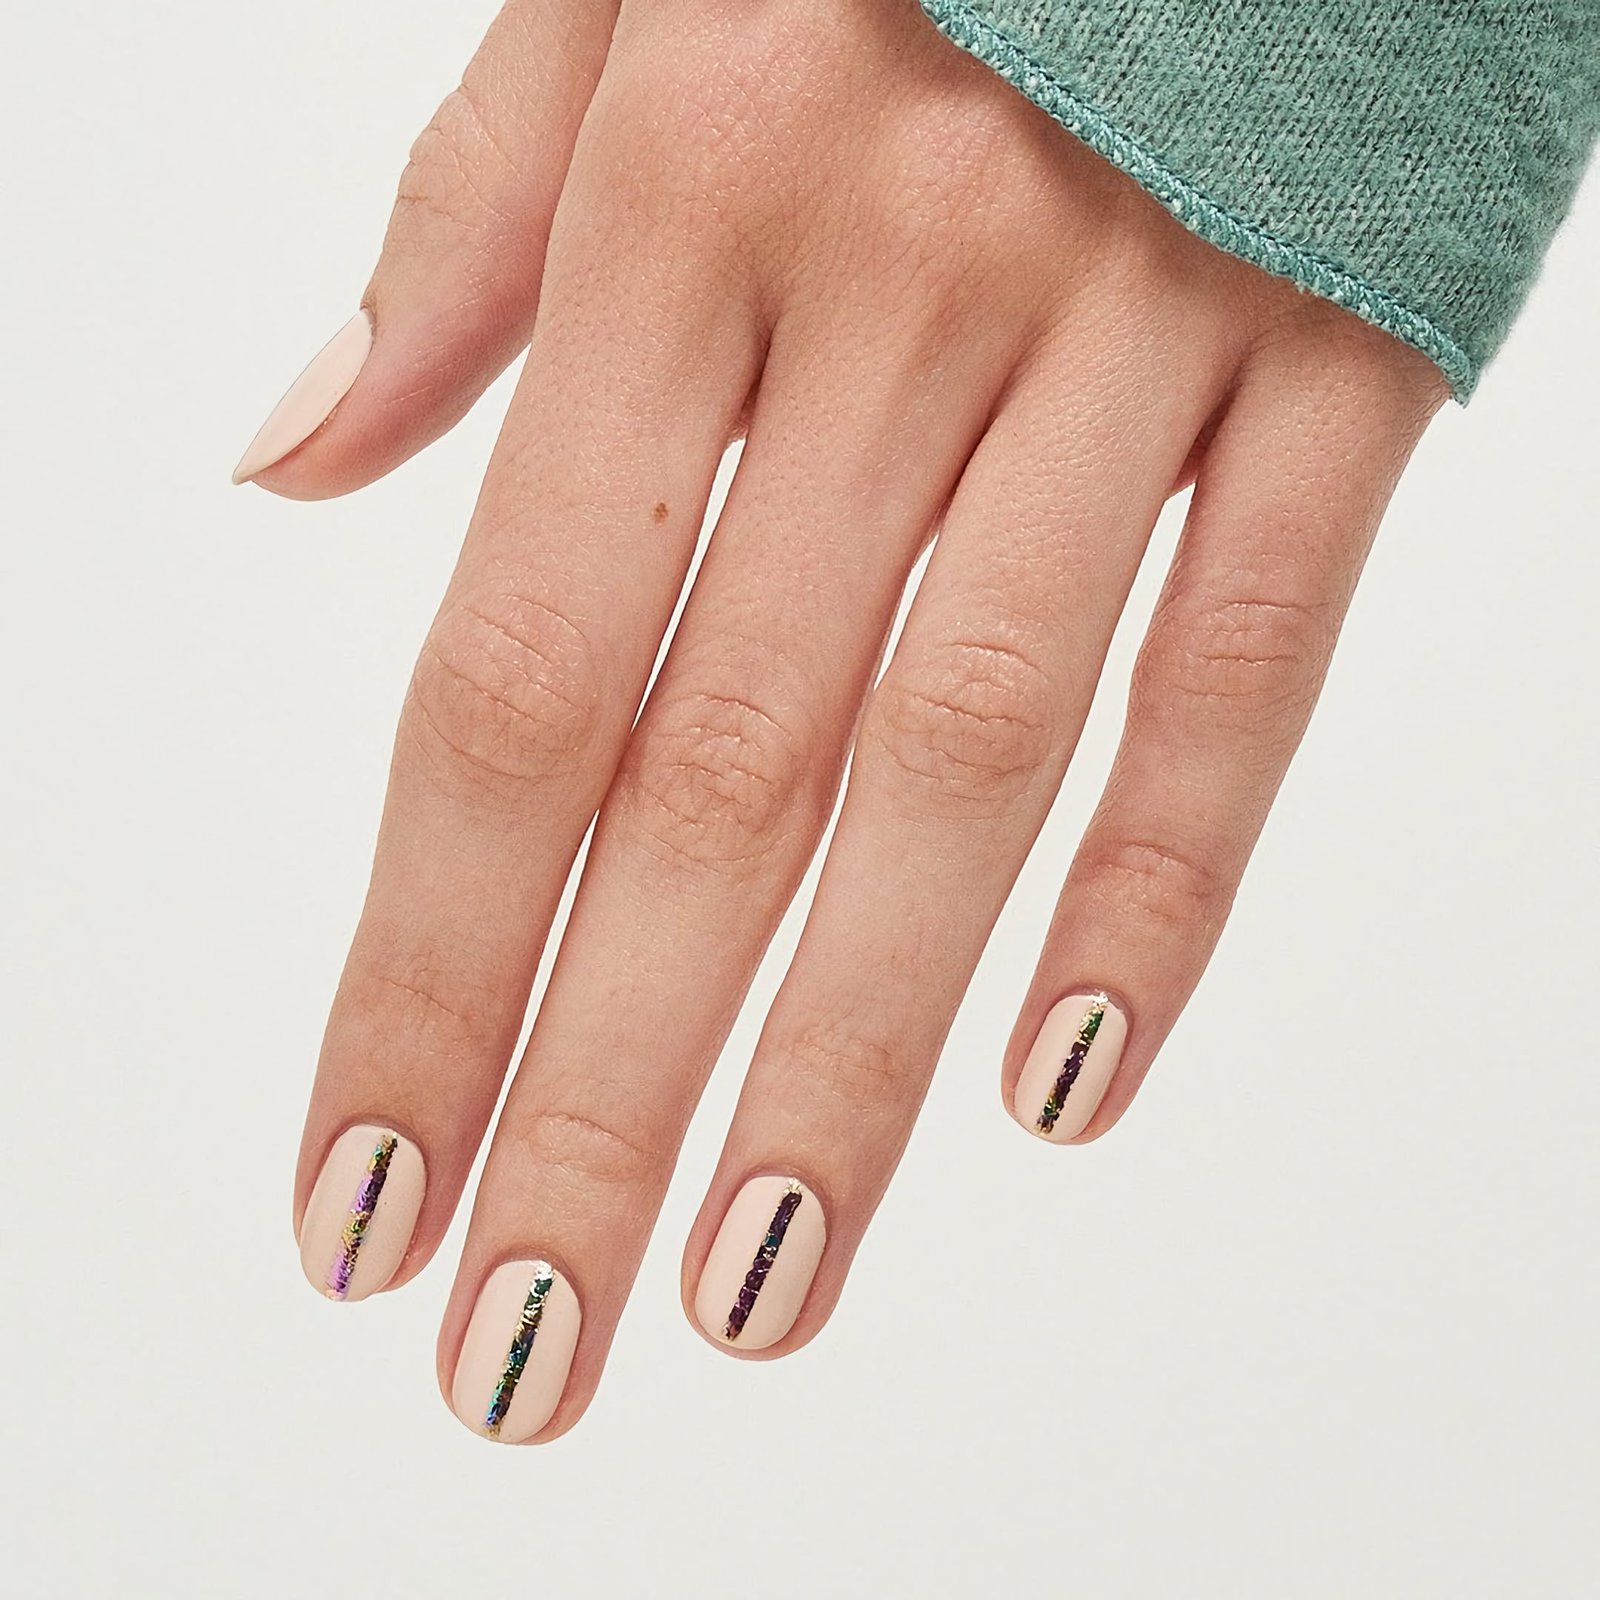 Nude manicure with stripes